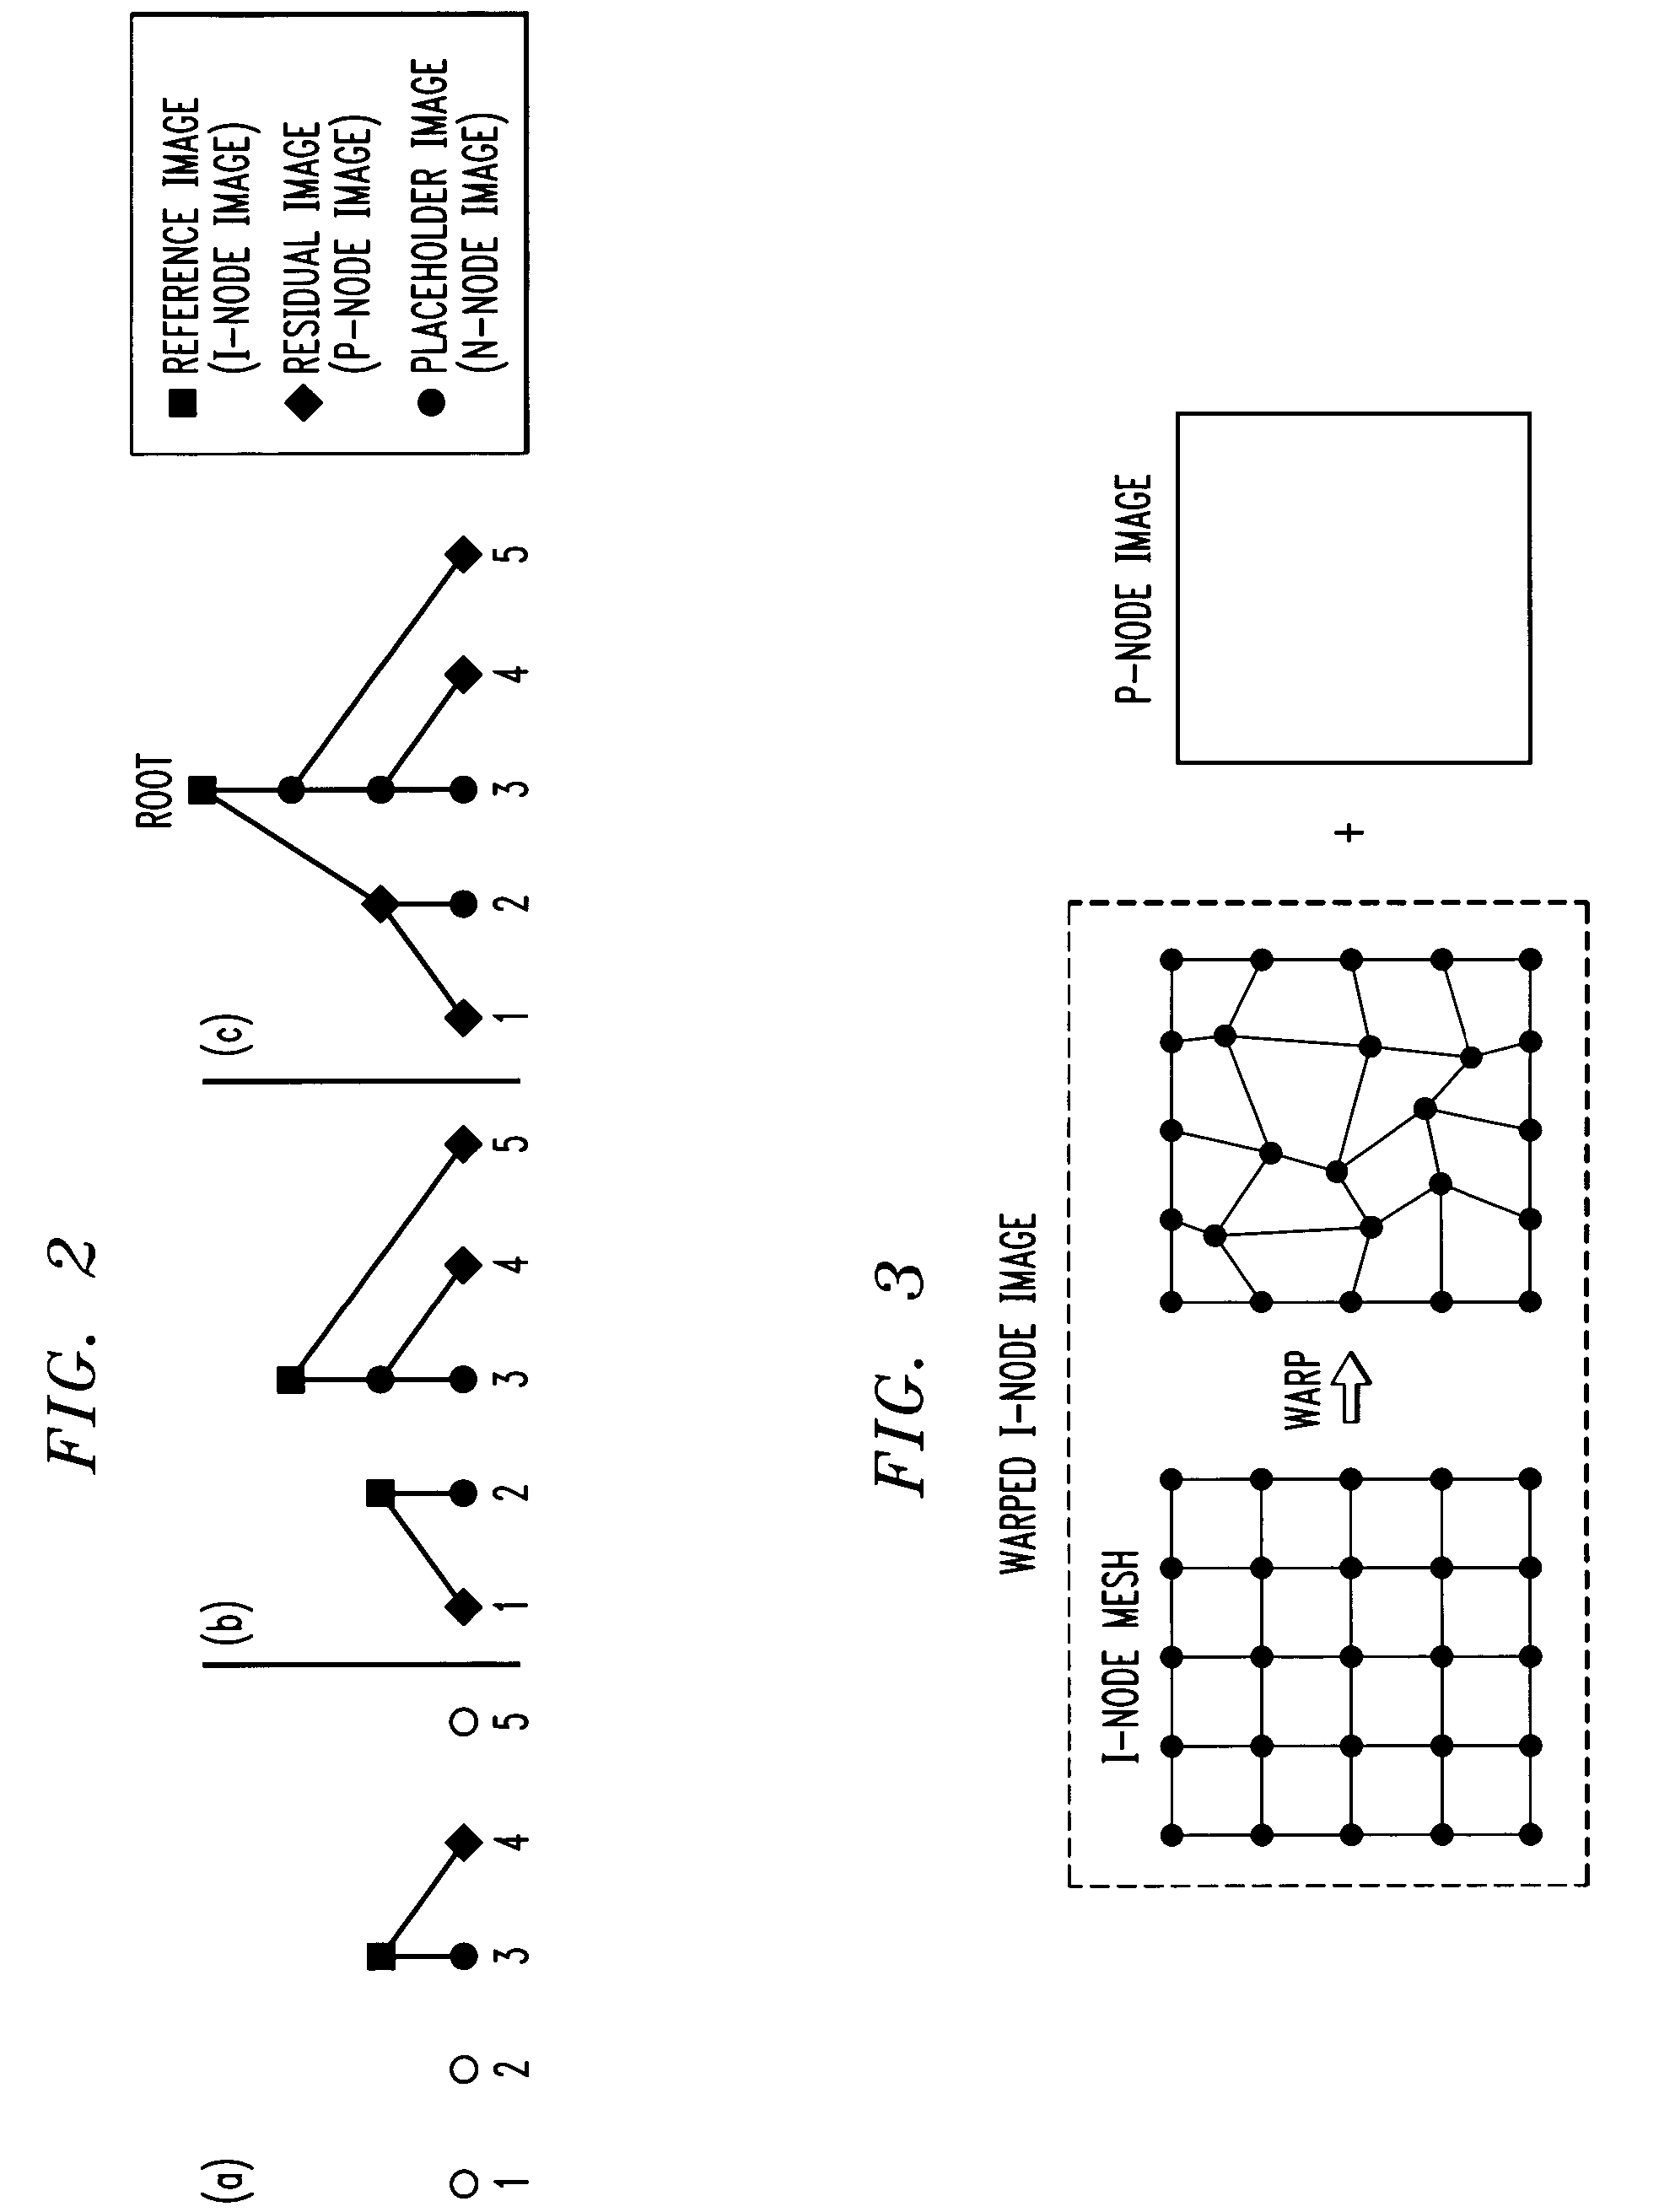 Method and apparatus for compressing and decompressing images captured from viewpoints throughout N-dimensional space